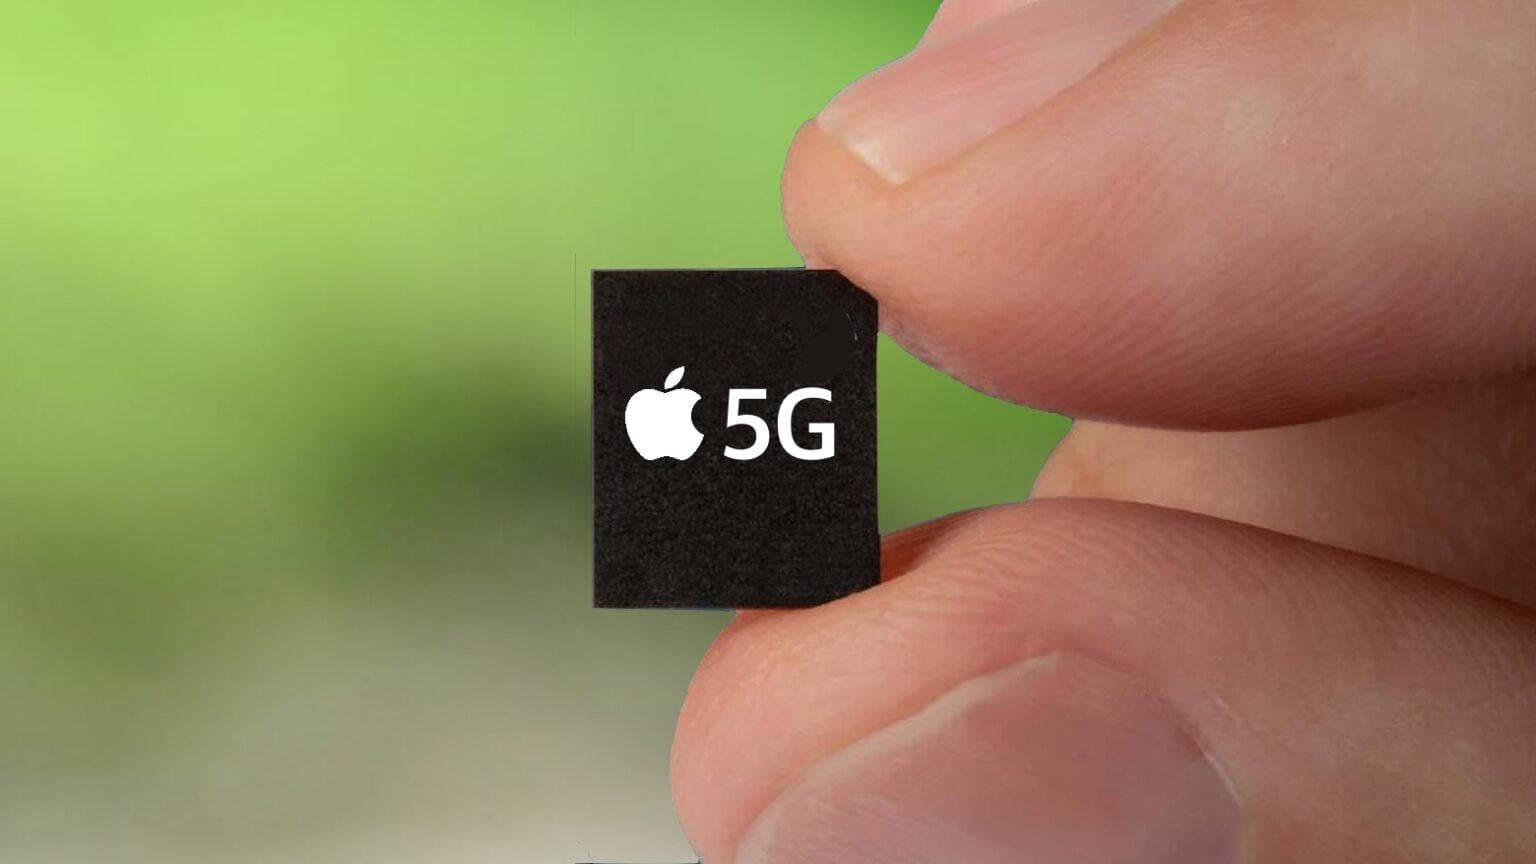 An Apple 5G modem might look like this